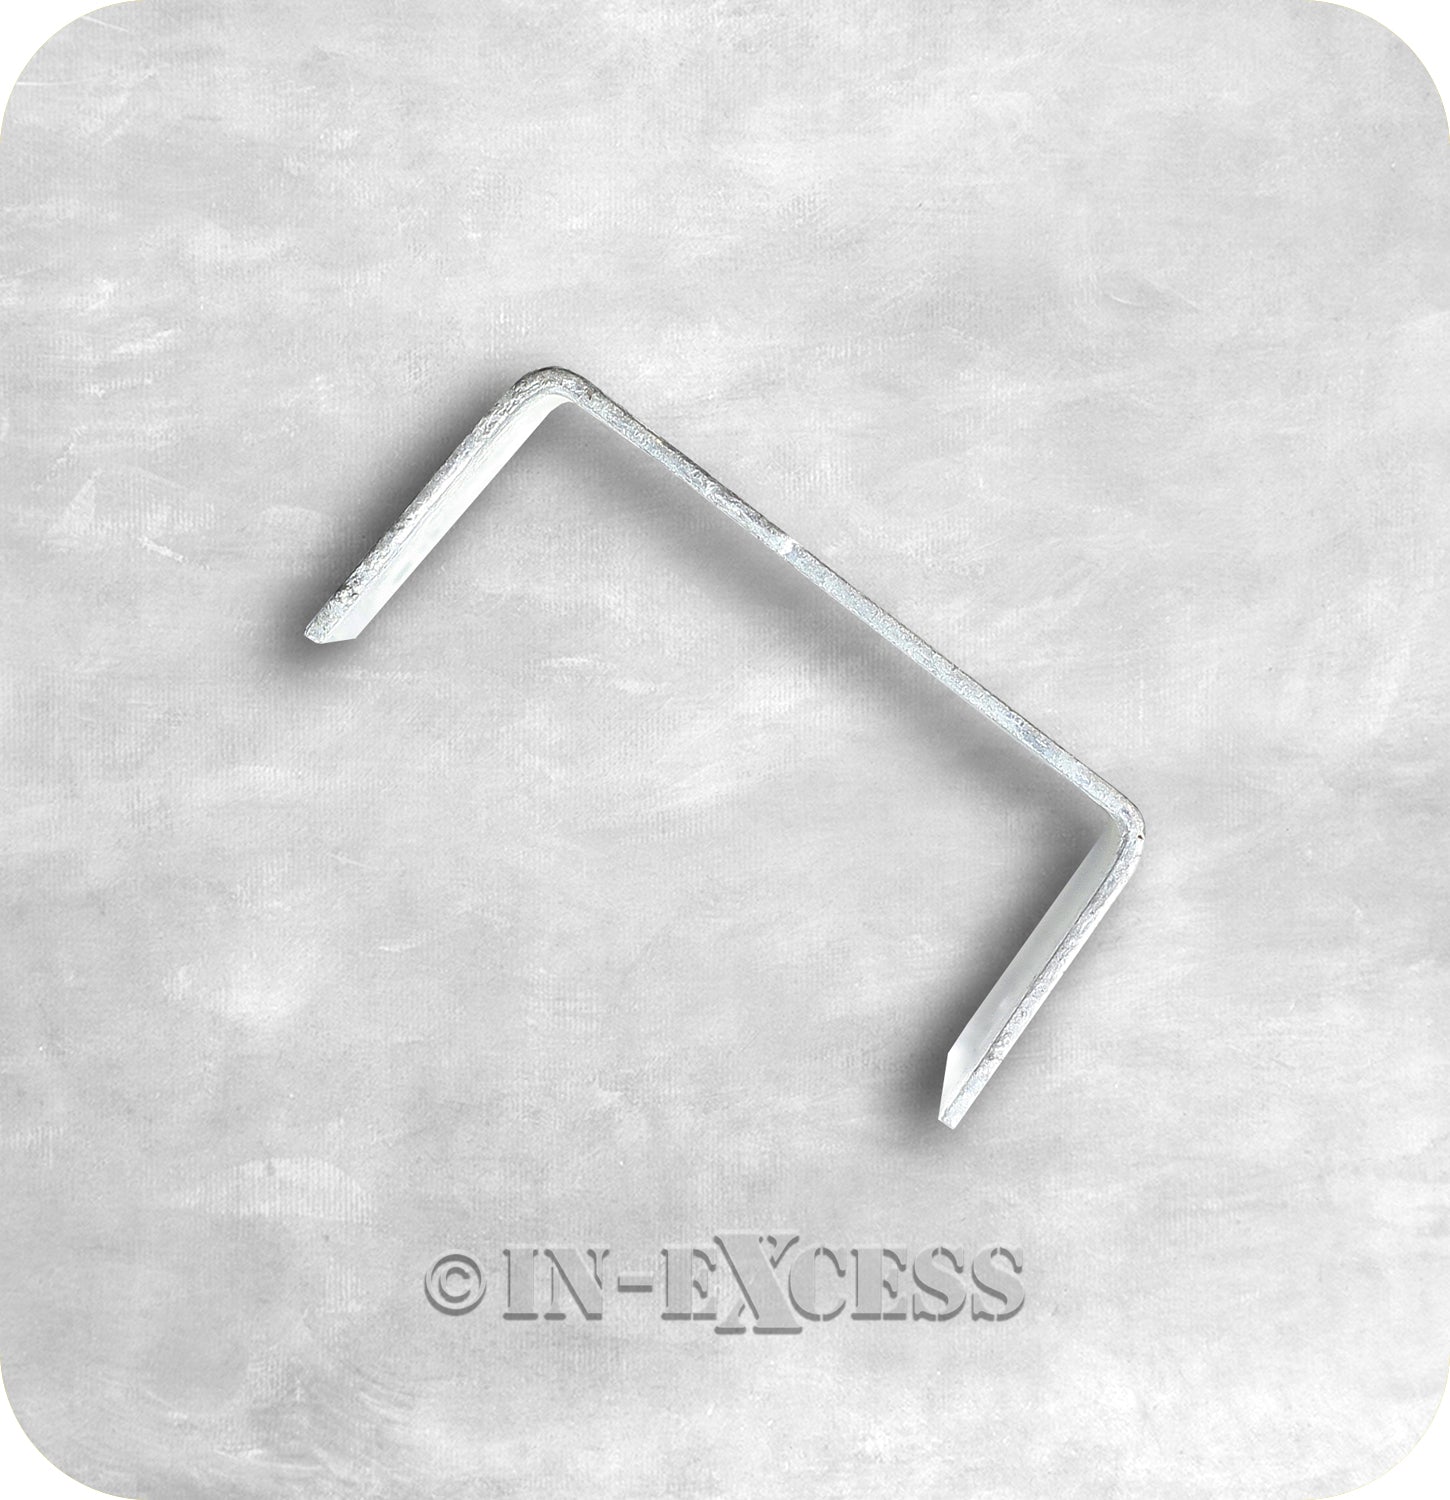 In-Excess Hardware Galvanised Fence Panel Fixing Fencing U-Clips - 50mm